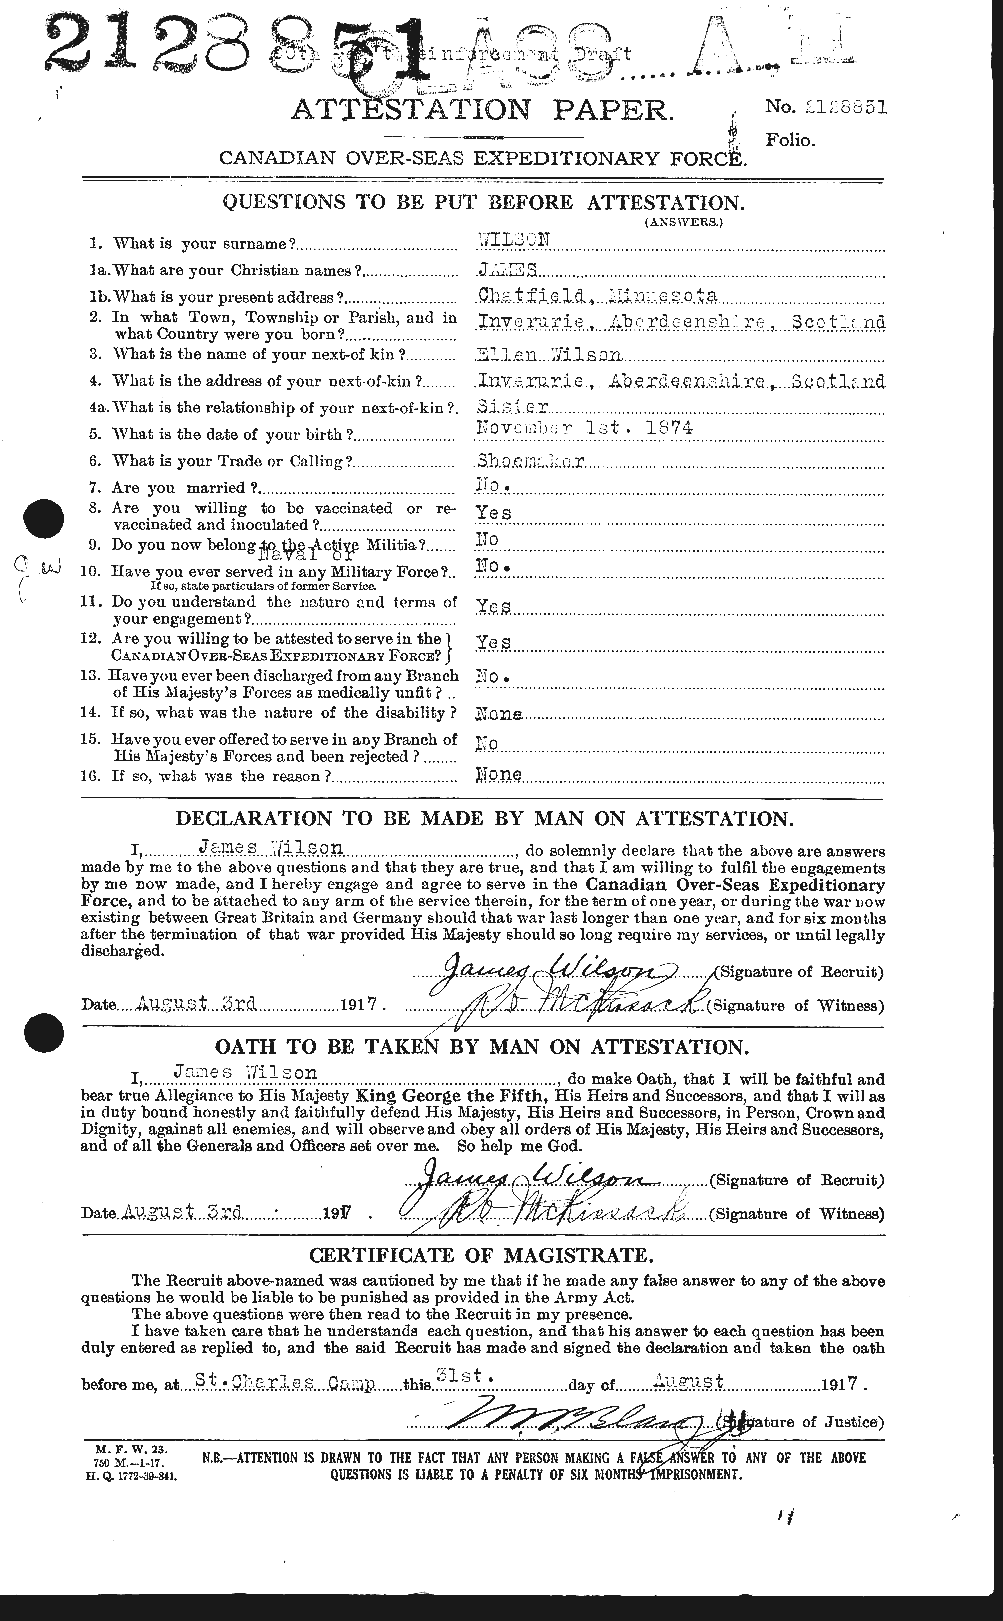 Personnel Records of the First World War - CEF 681339a